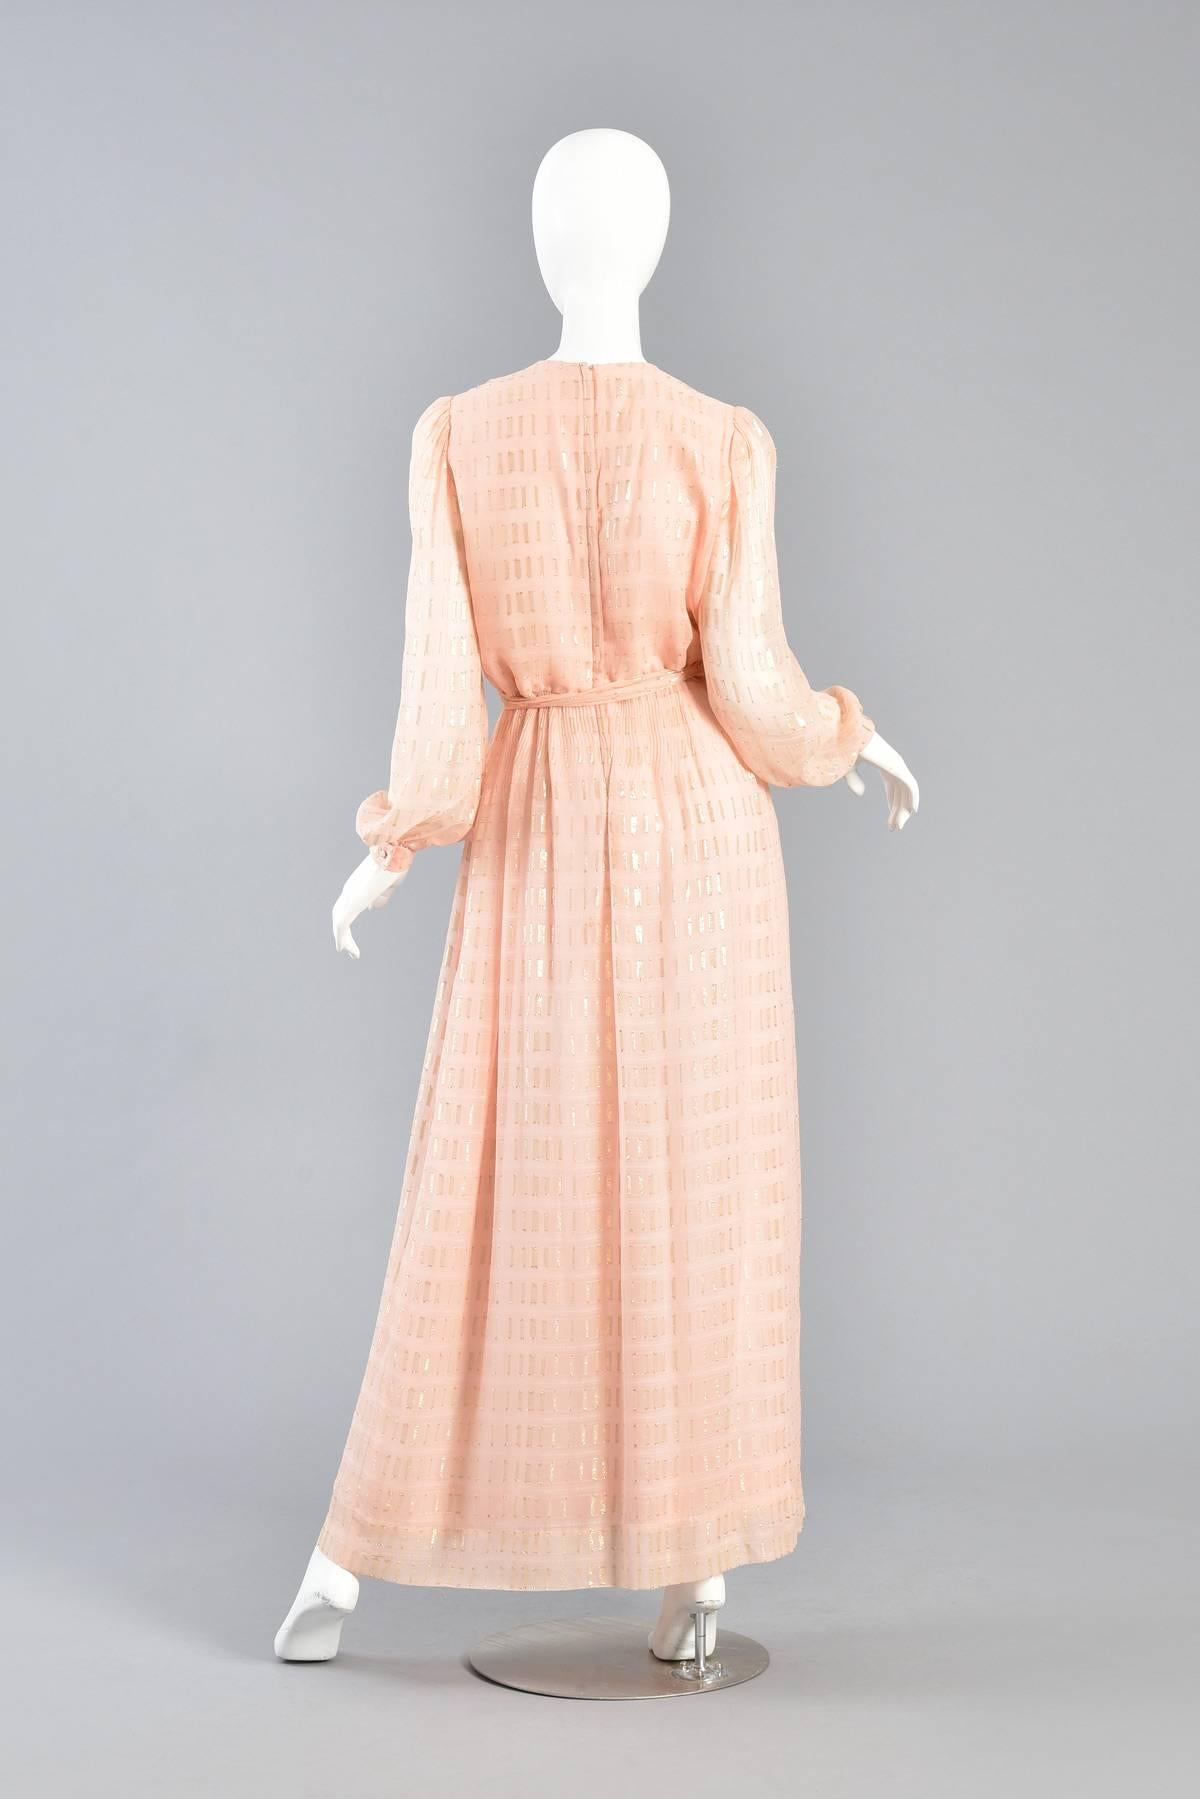 1960s Nat Kaplan Couture Peach Silk Dress with Gold Lurex Threads Throughout For Sale 4